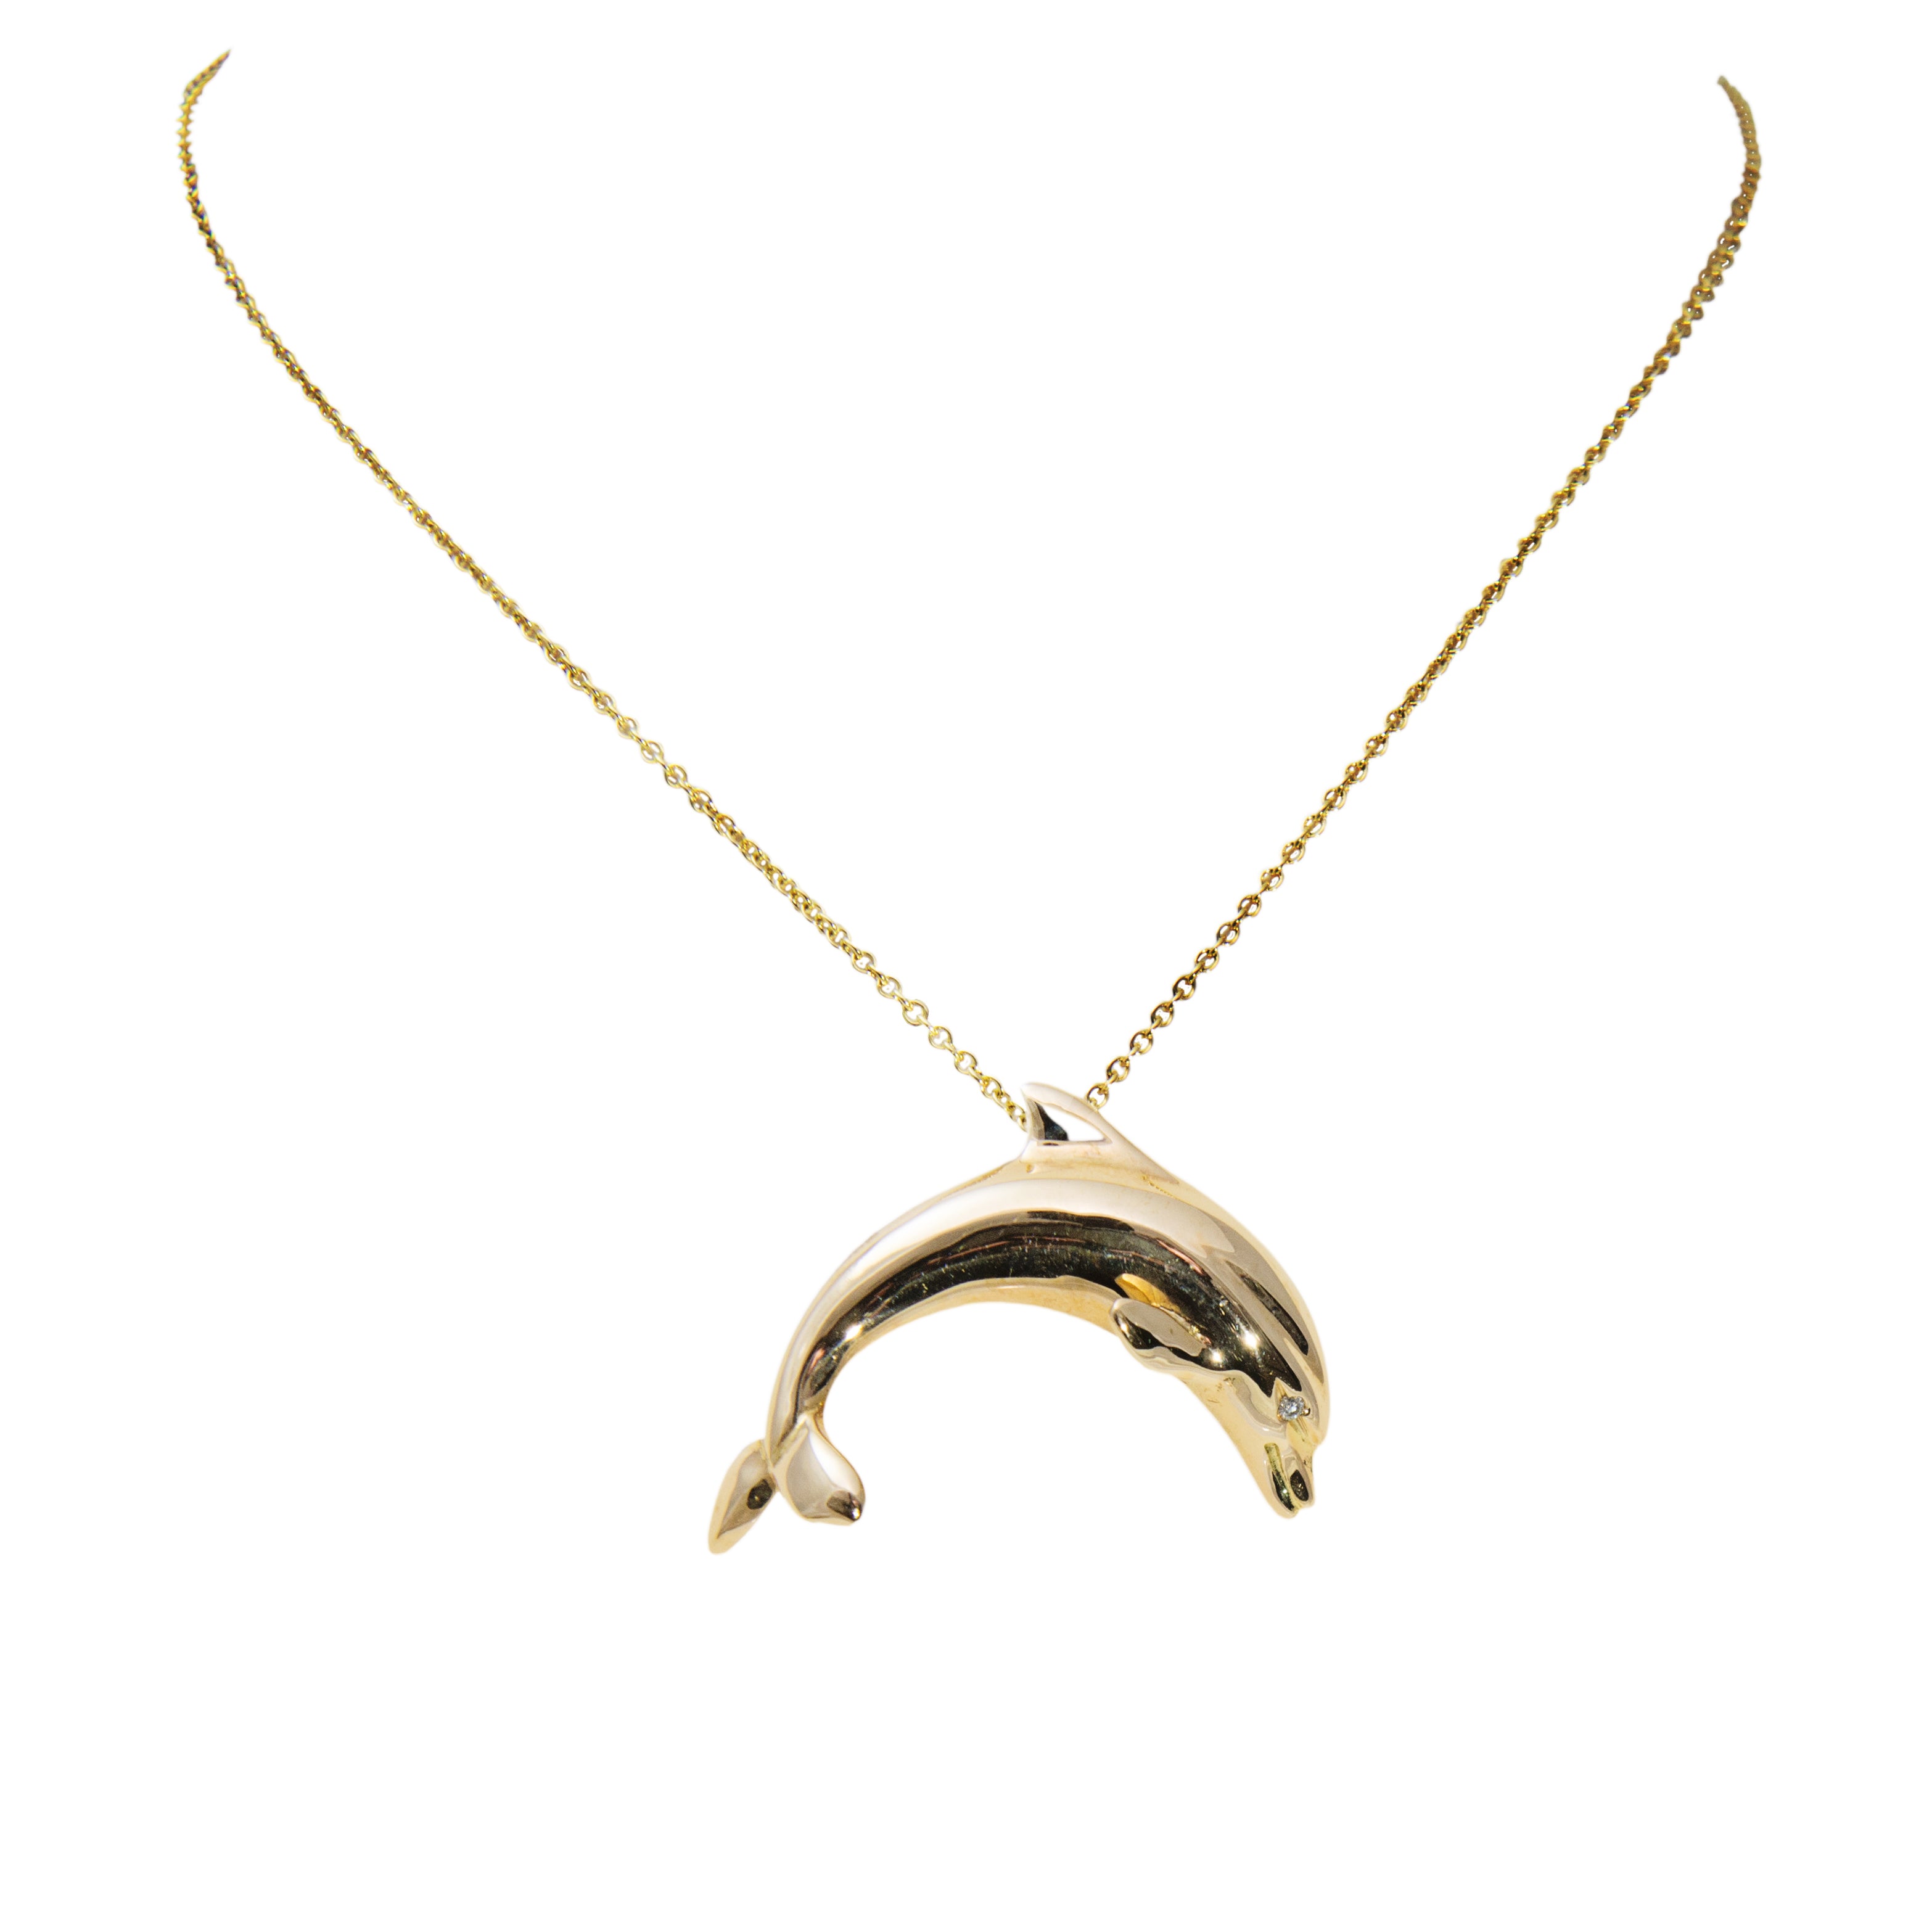 18k Italian yellow gold dolphin charm, 3D style, 13.2 grams, 1 1/2" long, secure lobster clasp, small eye diamond.  18" 14k yellow gold chain is optional $265.00 